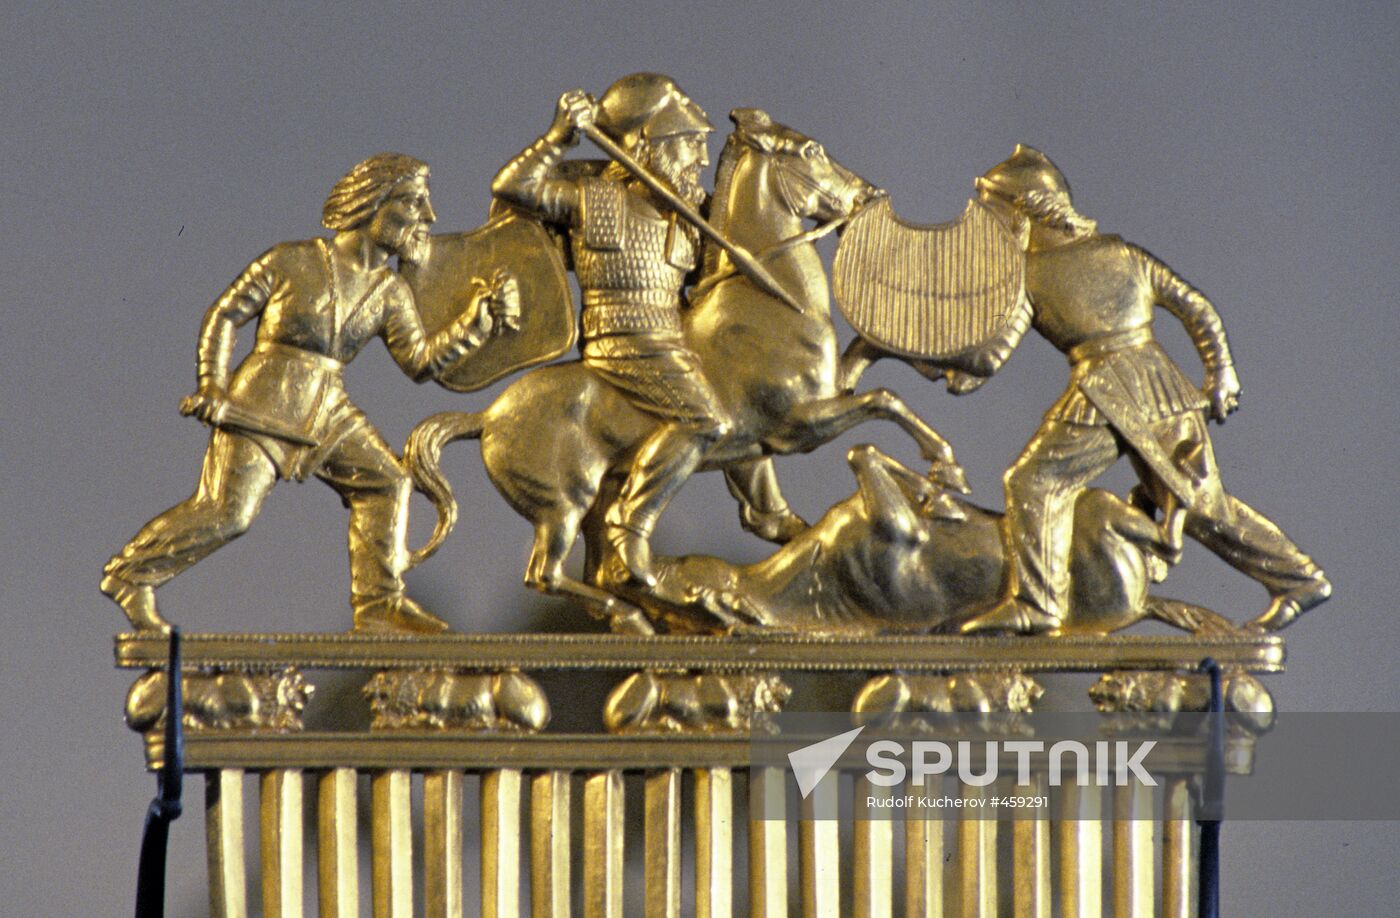 Comb with image of battle scene